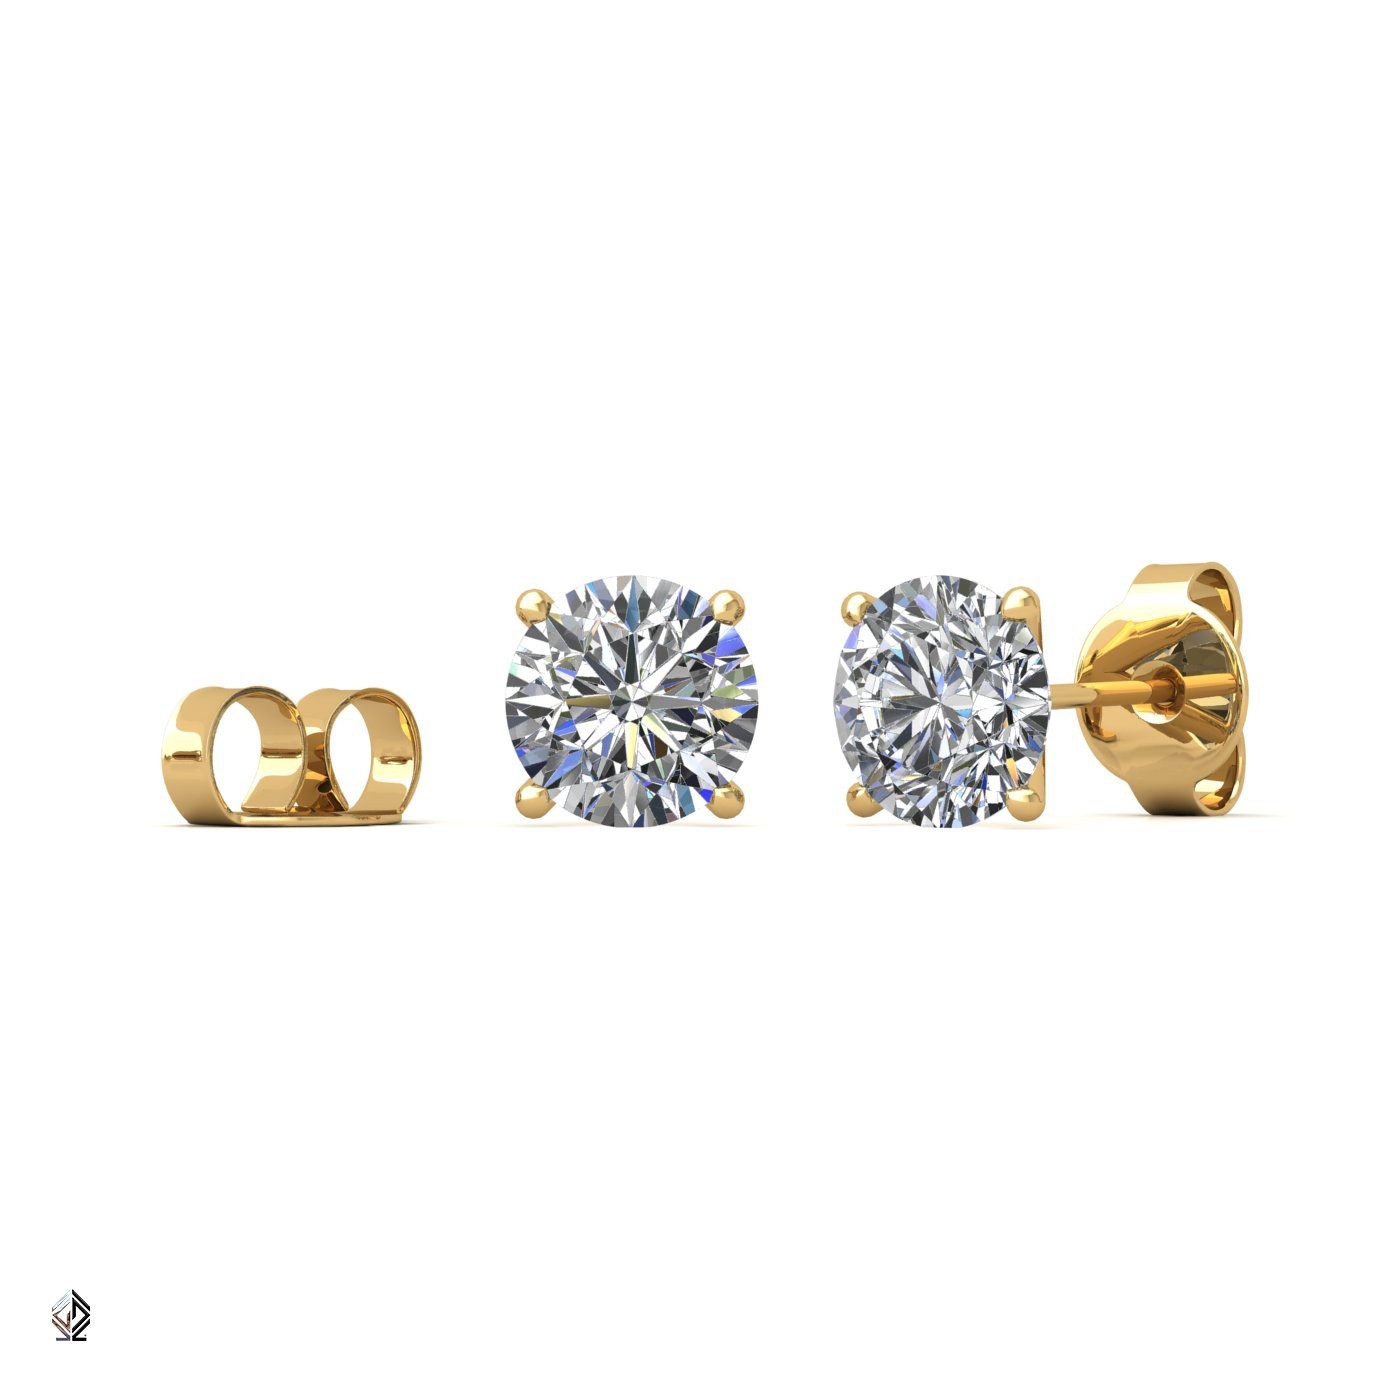 18k yellow gold 0,3 ct 4 prongs round cut classic diamond earring studs Photos & images